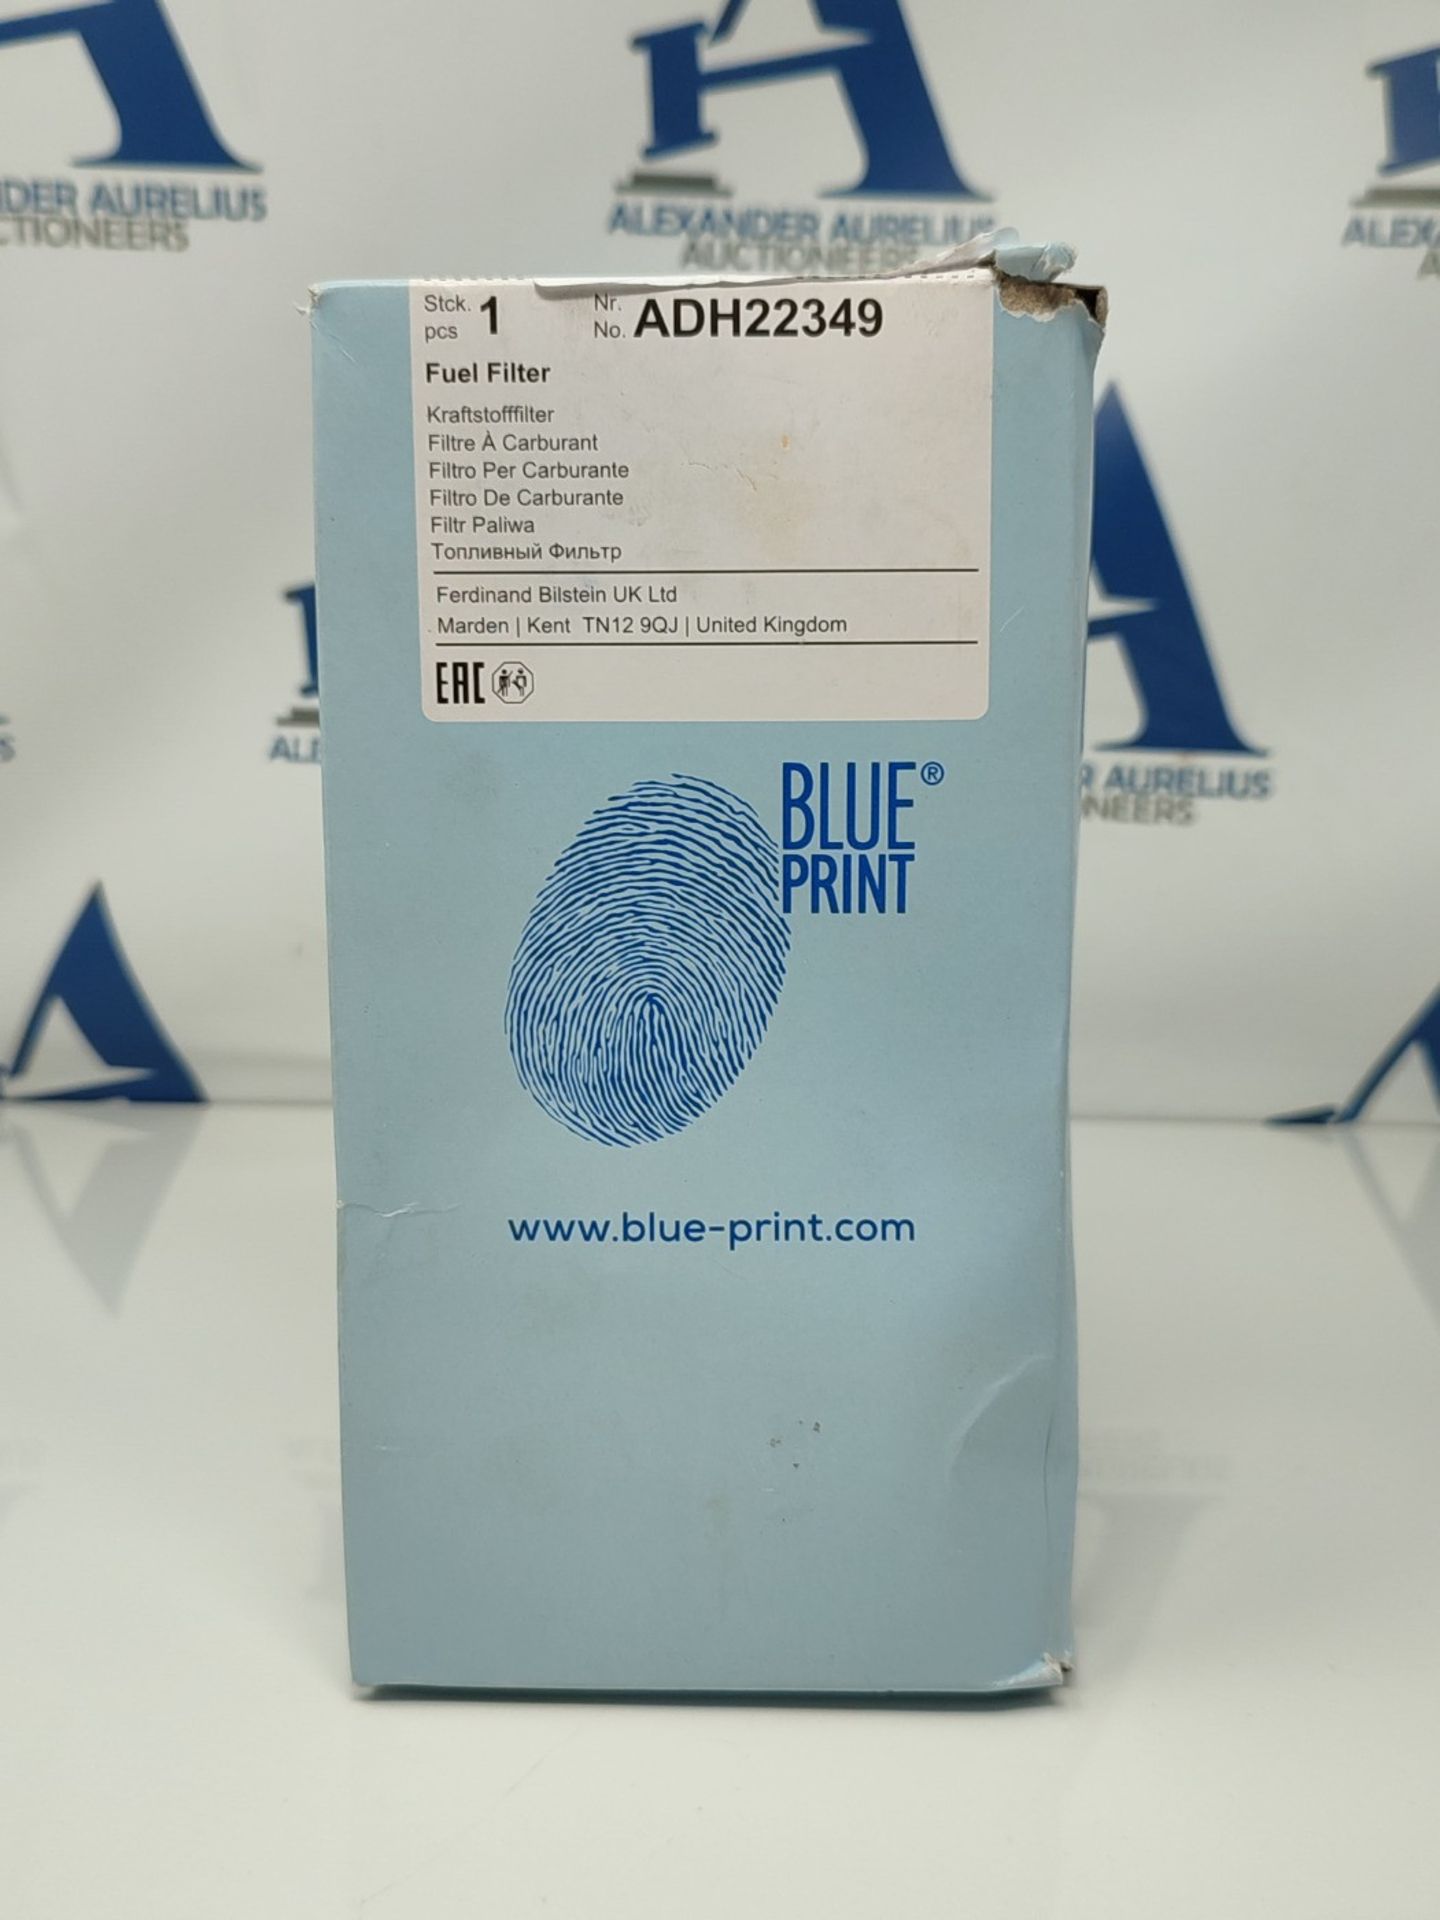 Blue Print ADH22349 Fuel Filter with seal ring, pack of one - Image 2 of 3